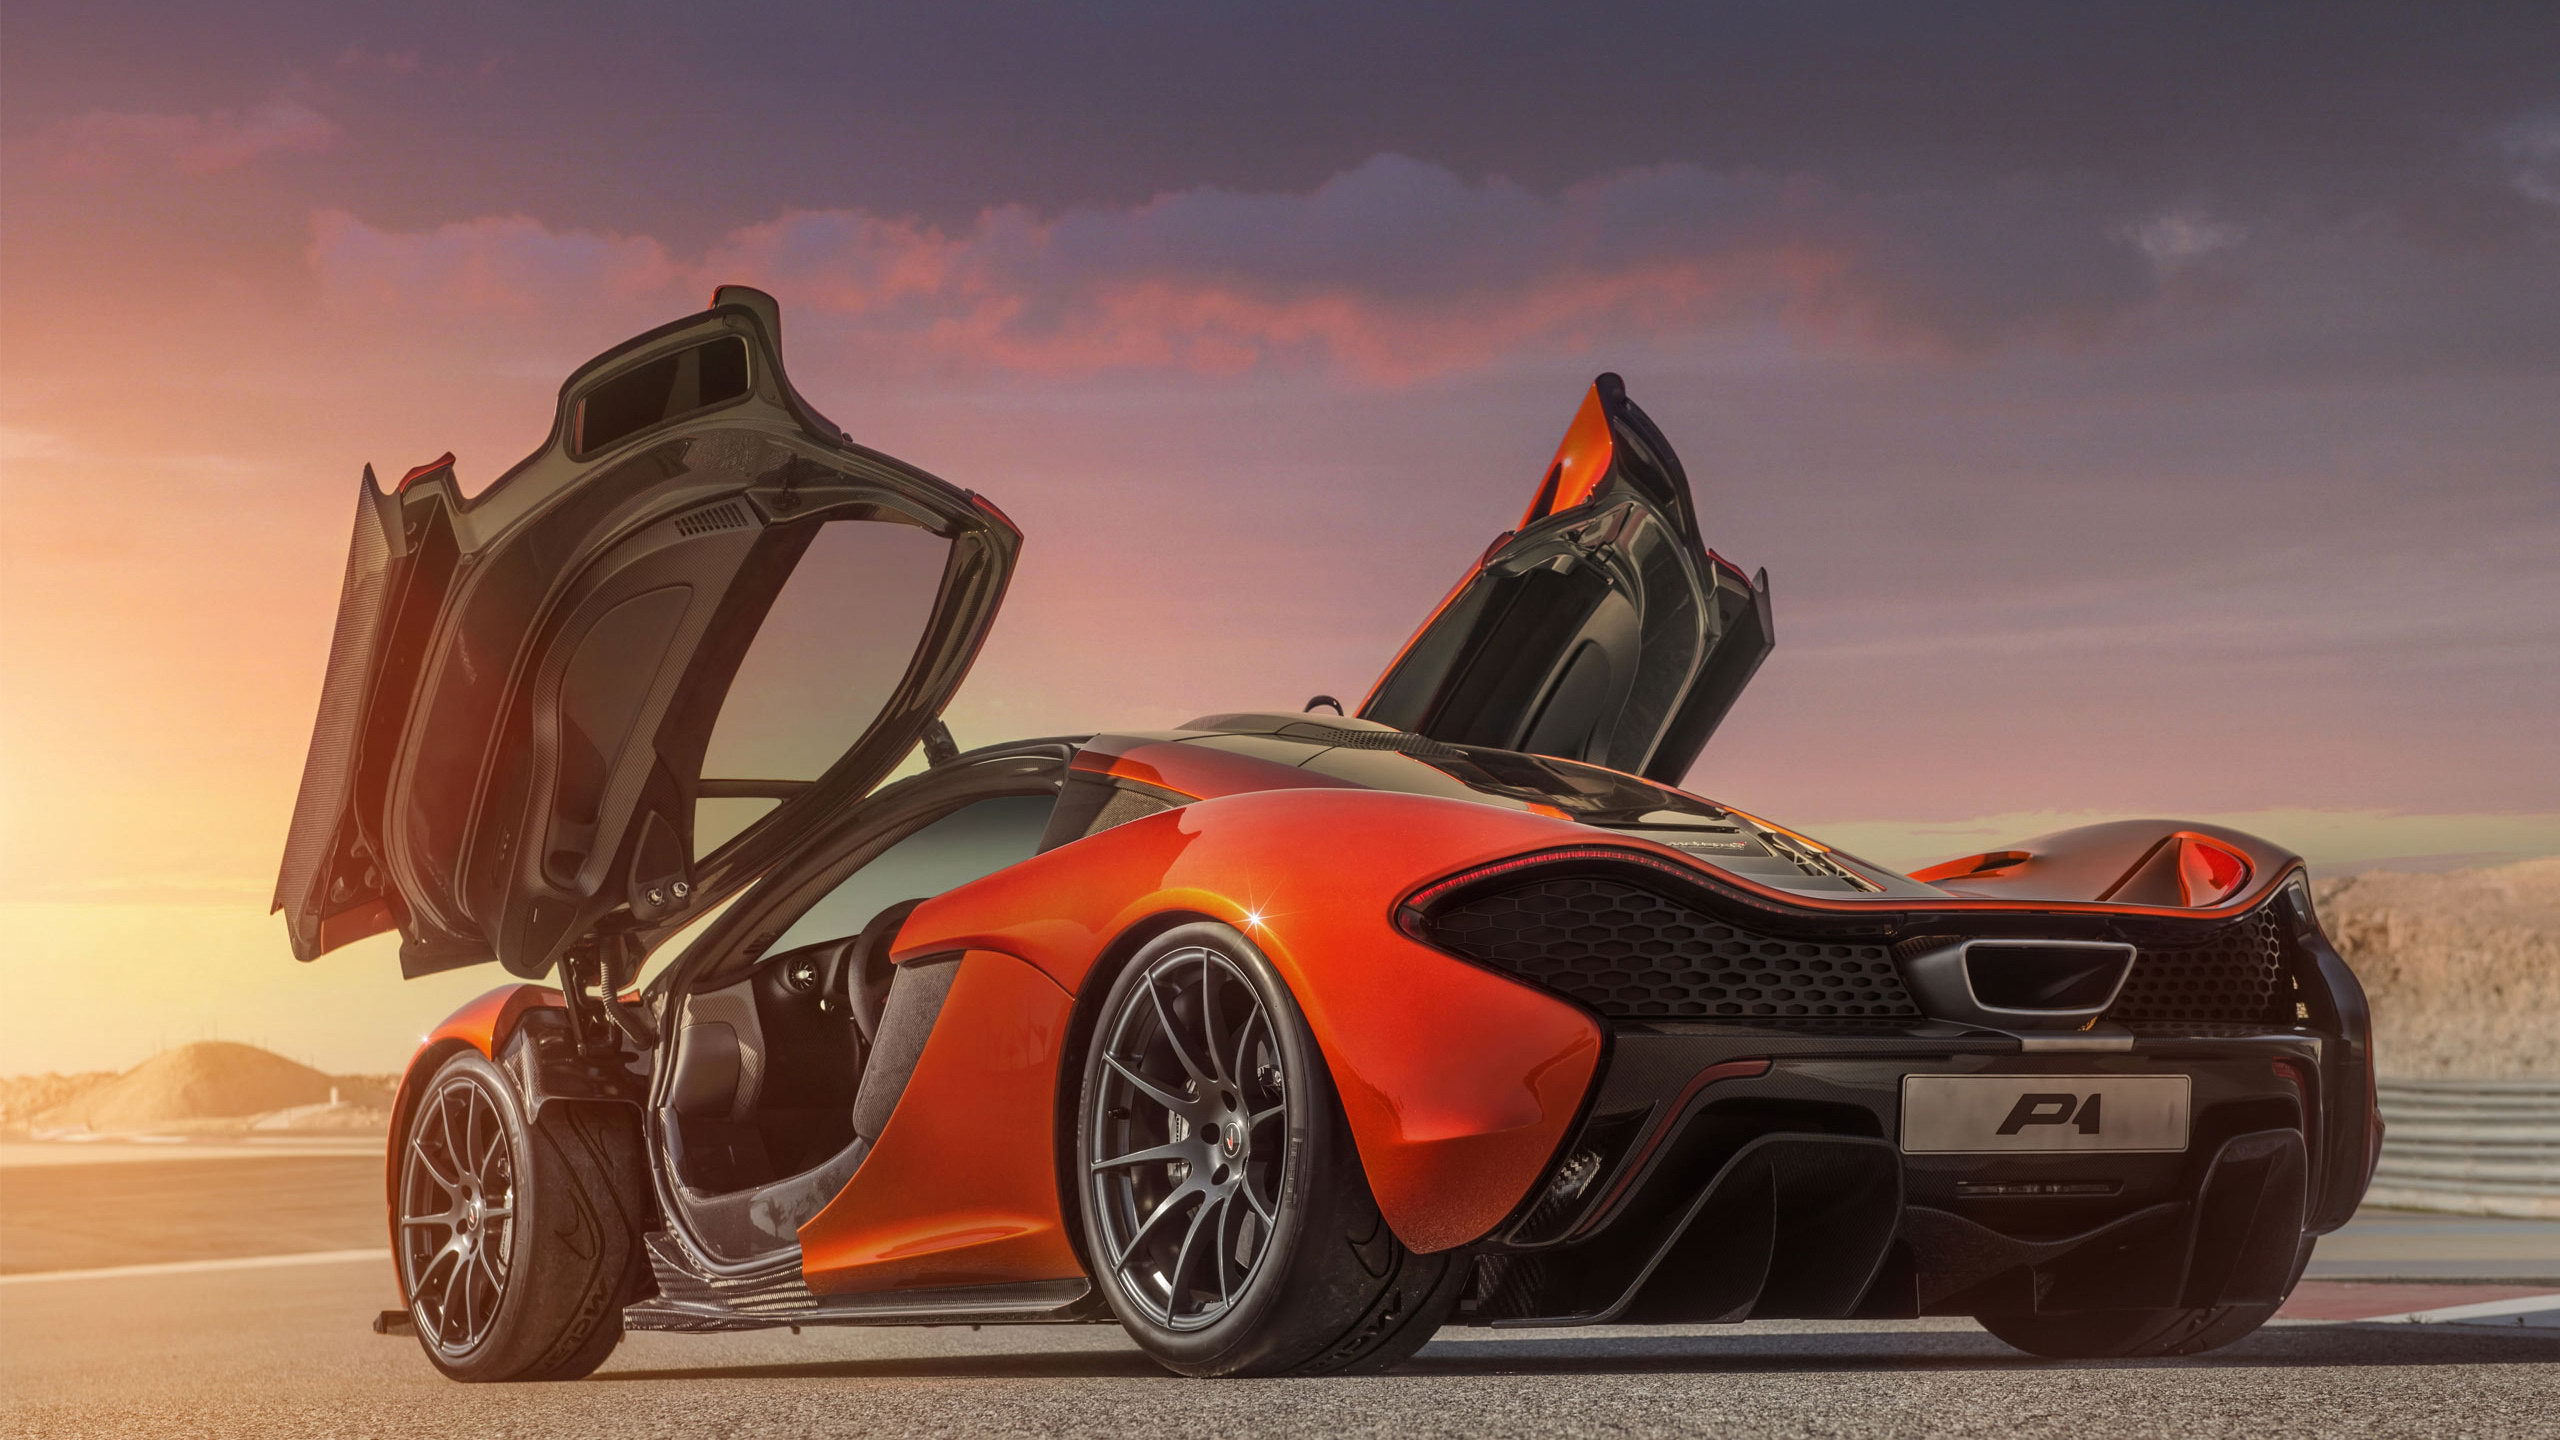 Mclaren P1 Car On The Road In 2014 Wallpapers And Images Wallpapers Pictures Photos